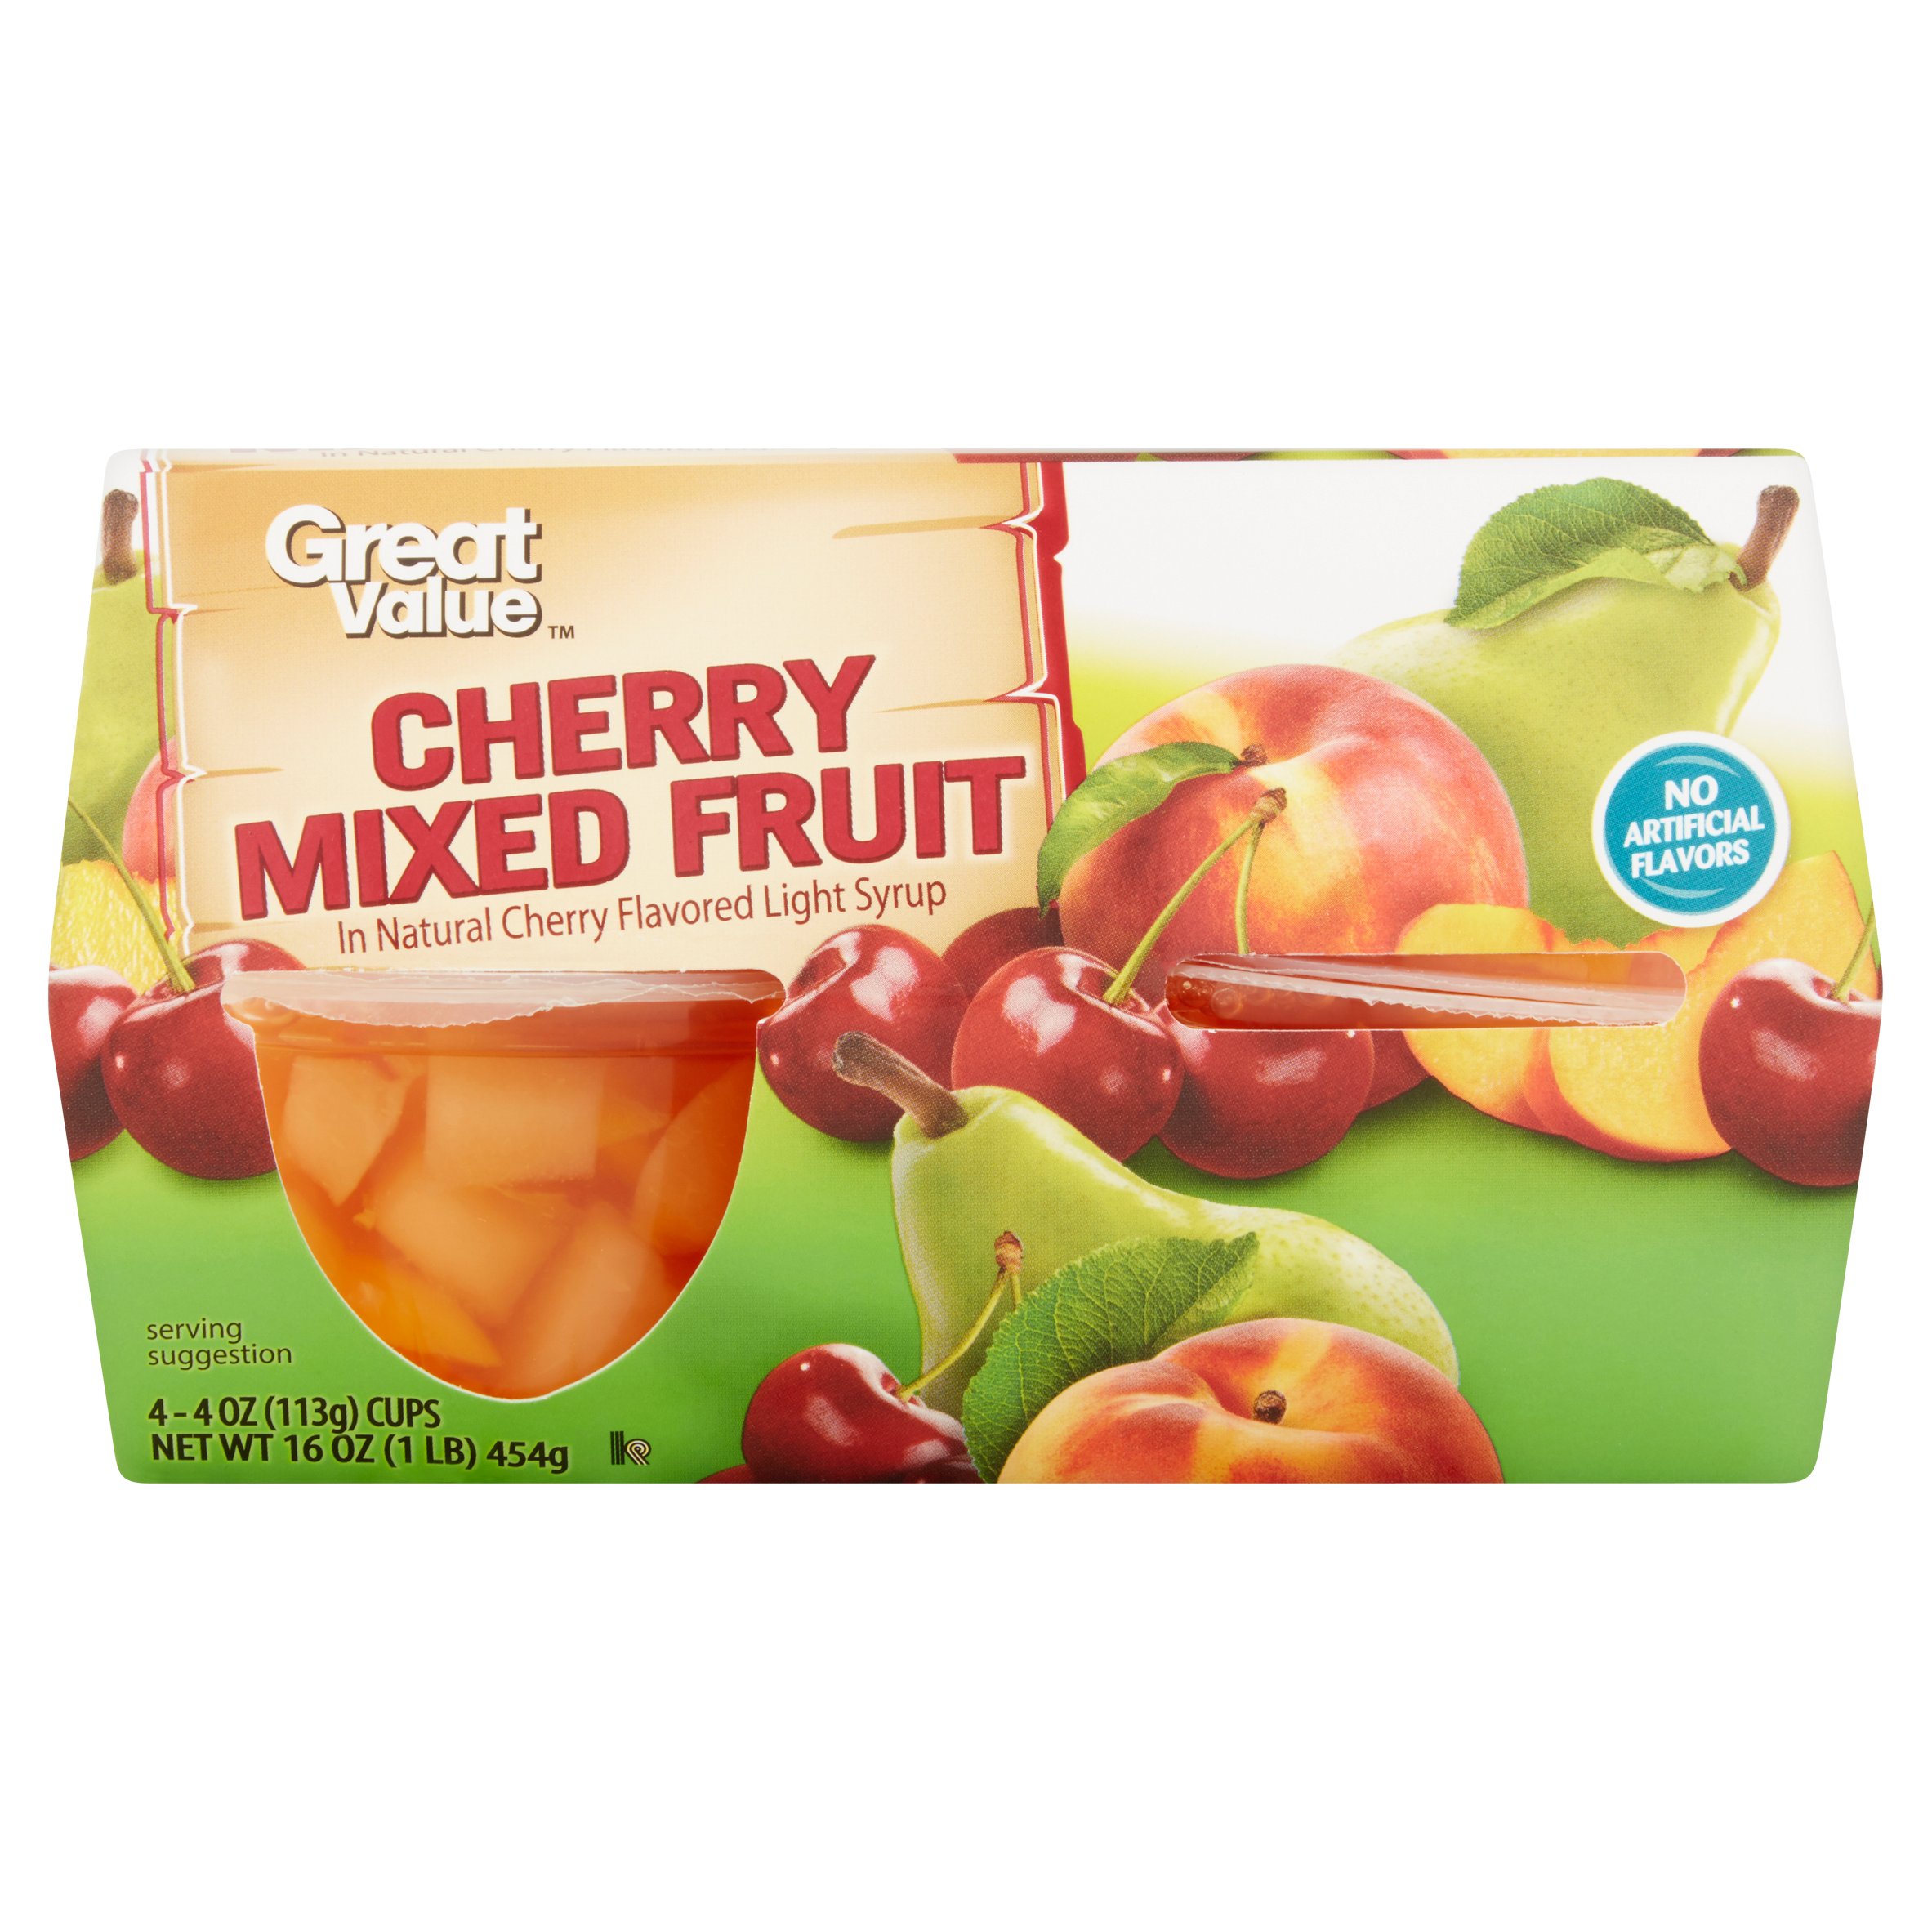 (3 Pack) Great Value Cherry Mixed Fruit in Cherry Light Syrup, 4 Oz, 4 Count Image